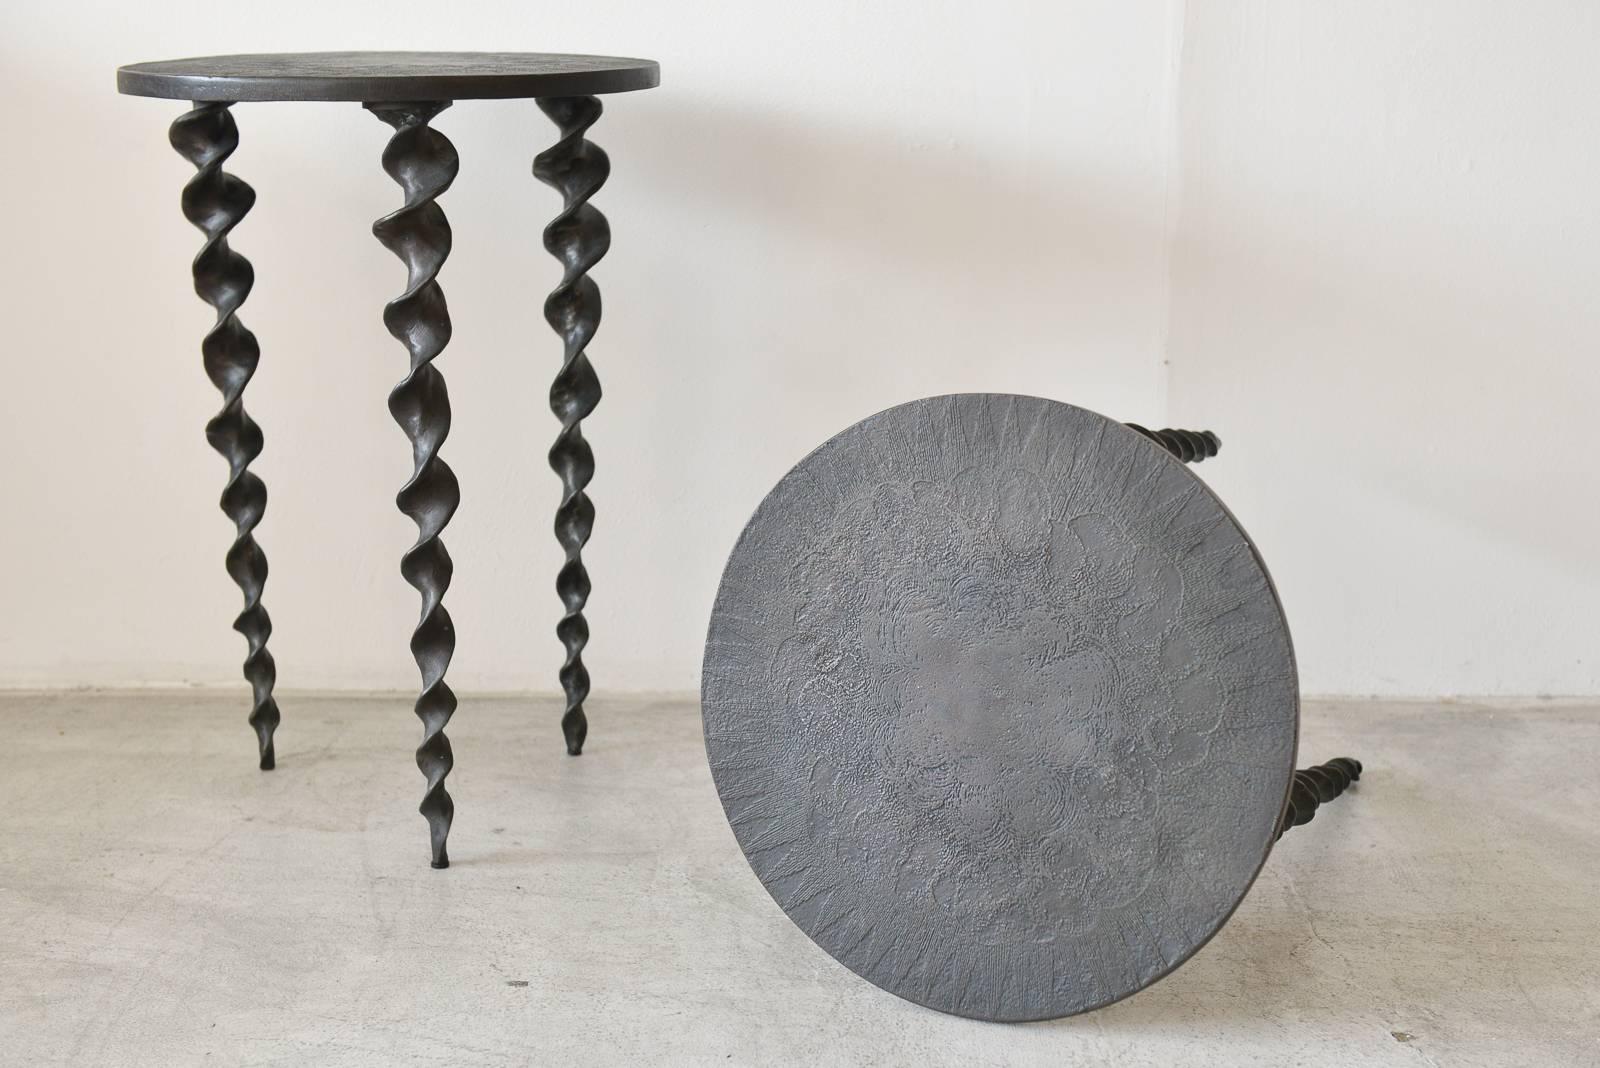 Unique tripod side tables by Michael Aram, crafted in metal with corkscrew tripod legs and oxidized metal table tops and legs. Beautiful design, excellent condition. Sold as a pair.

Each measure 17.5